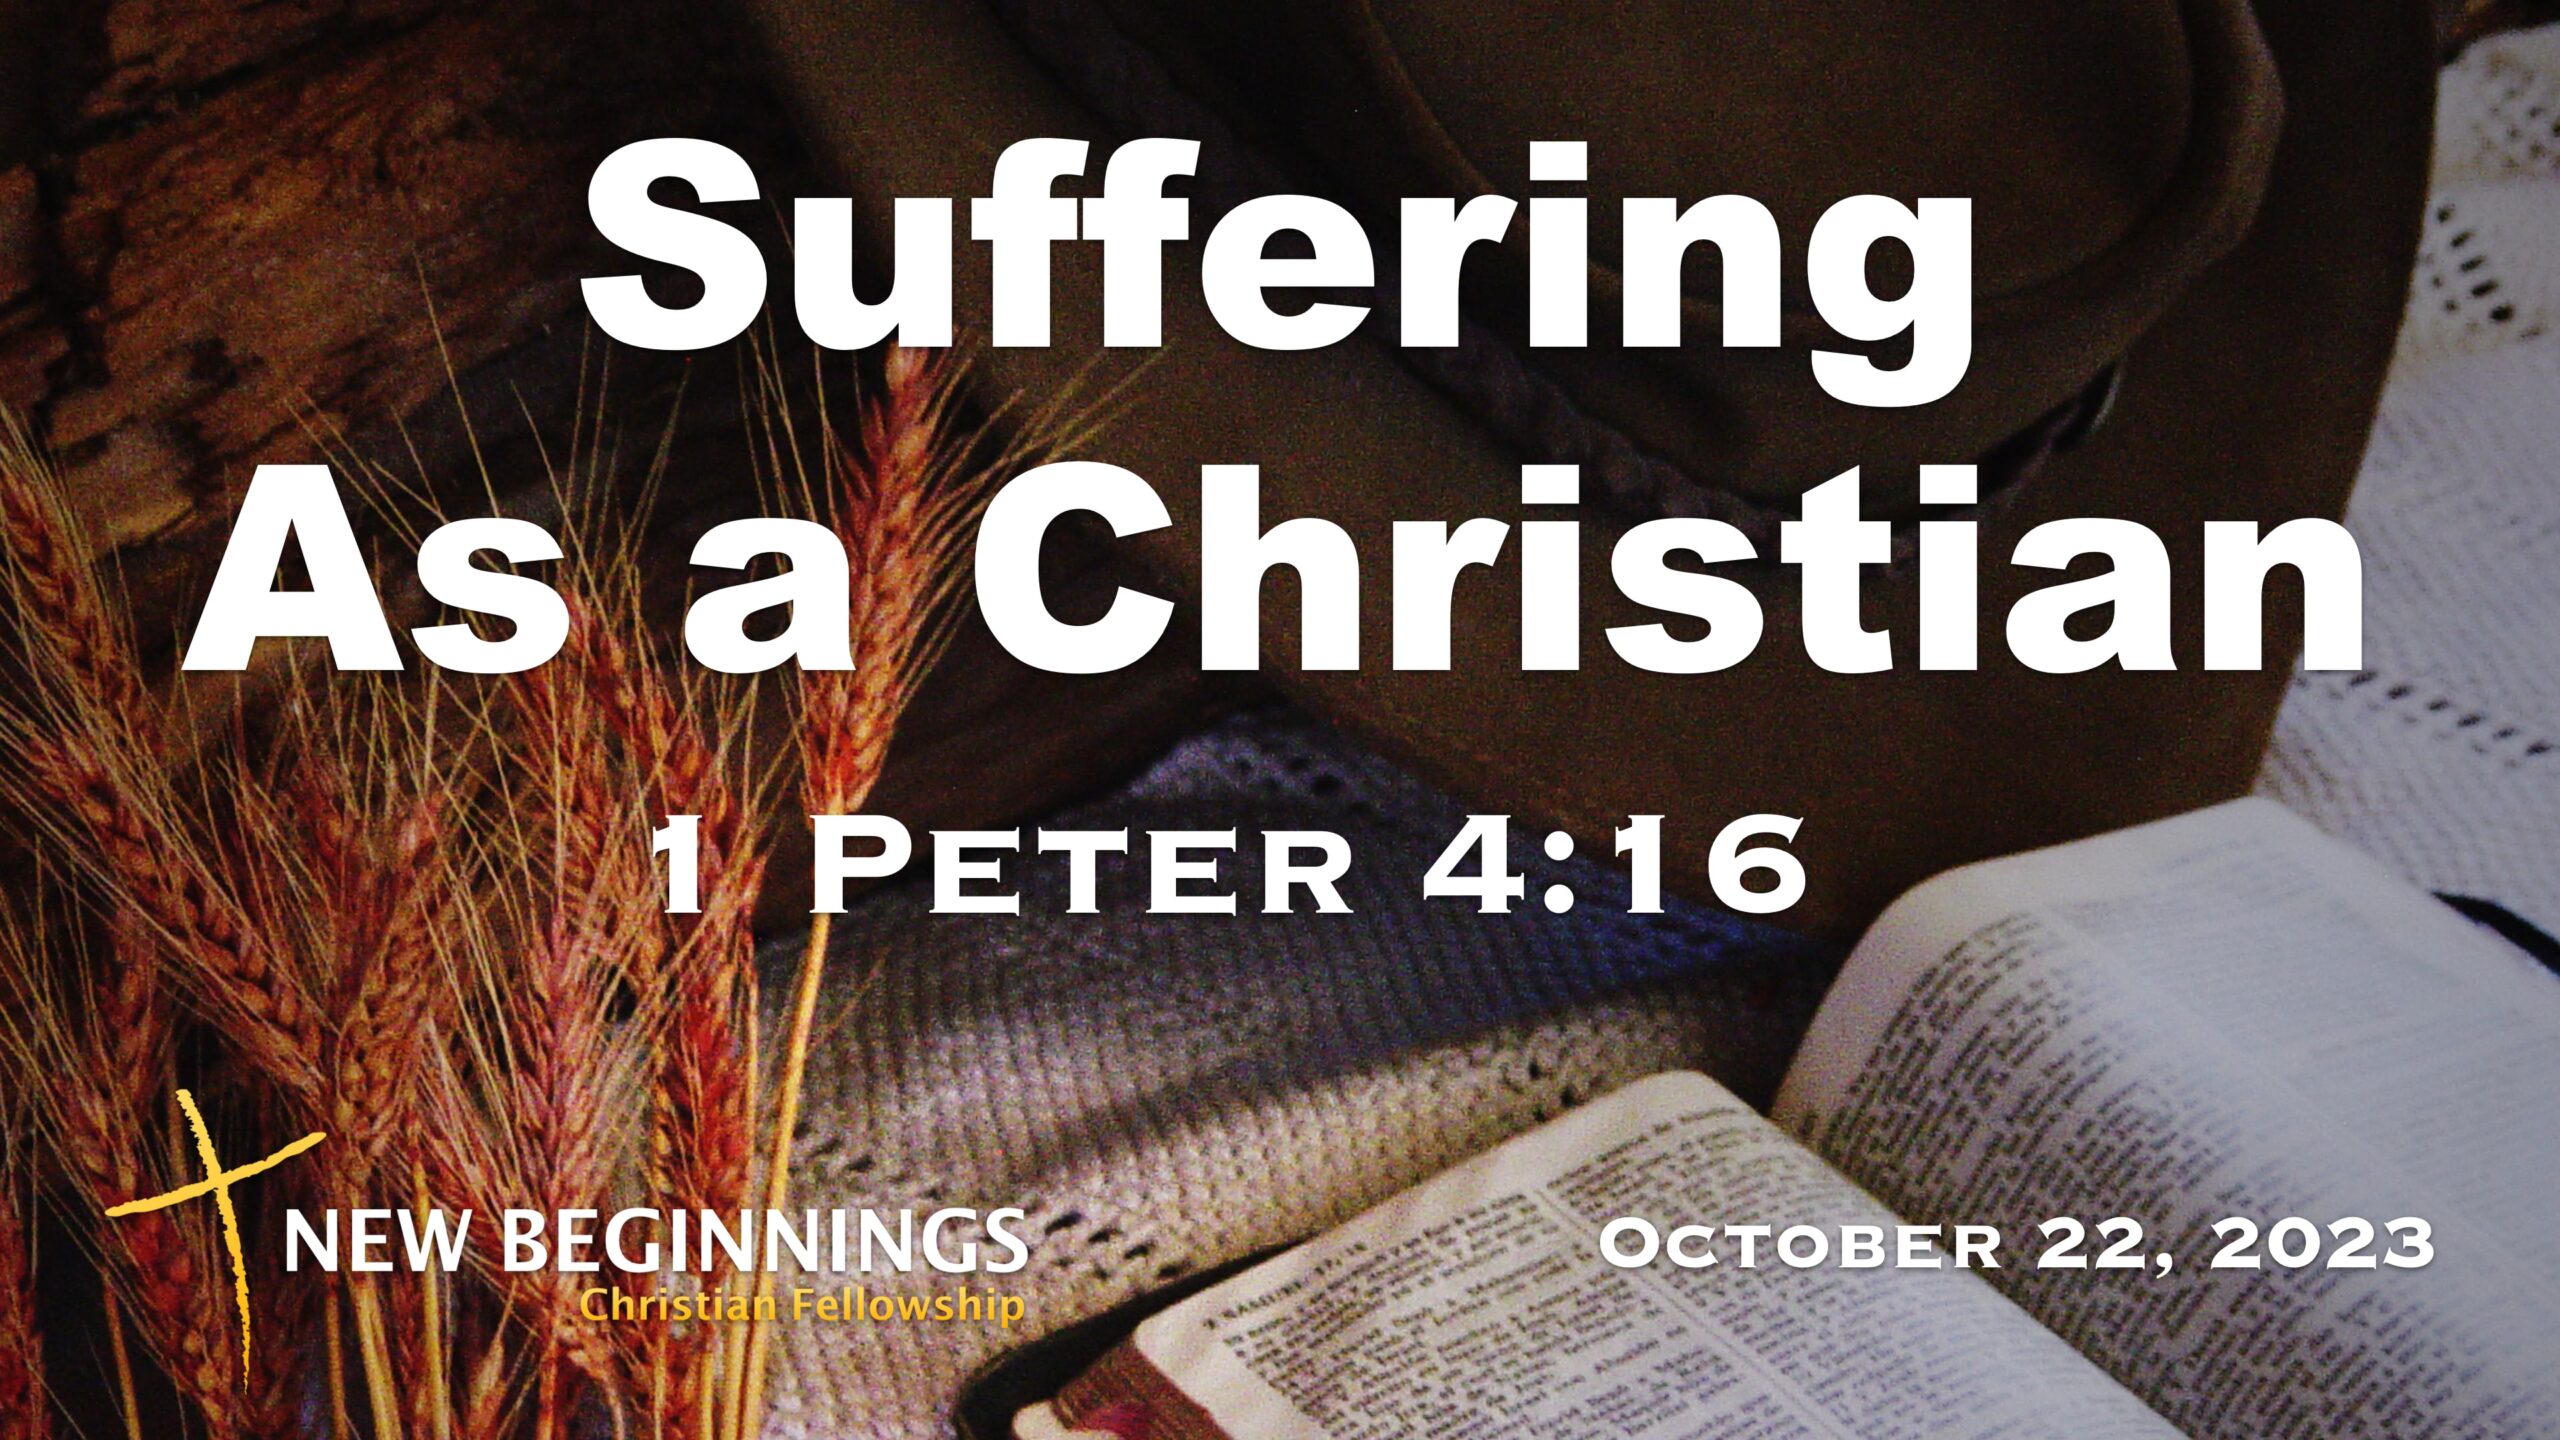 Suffering As A Christian